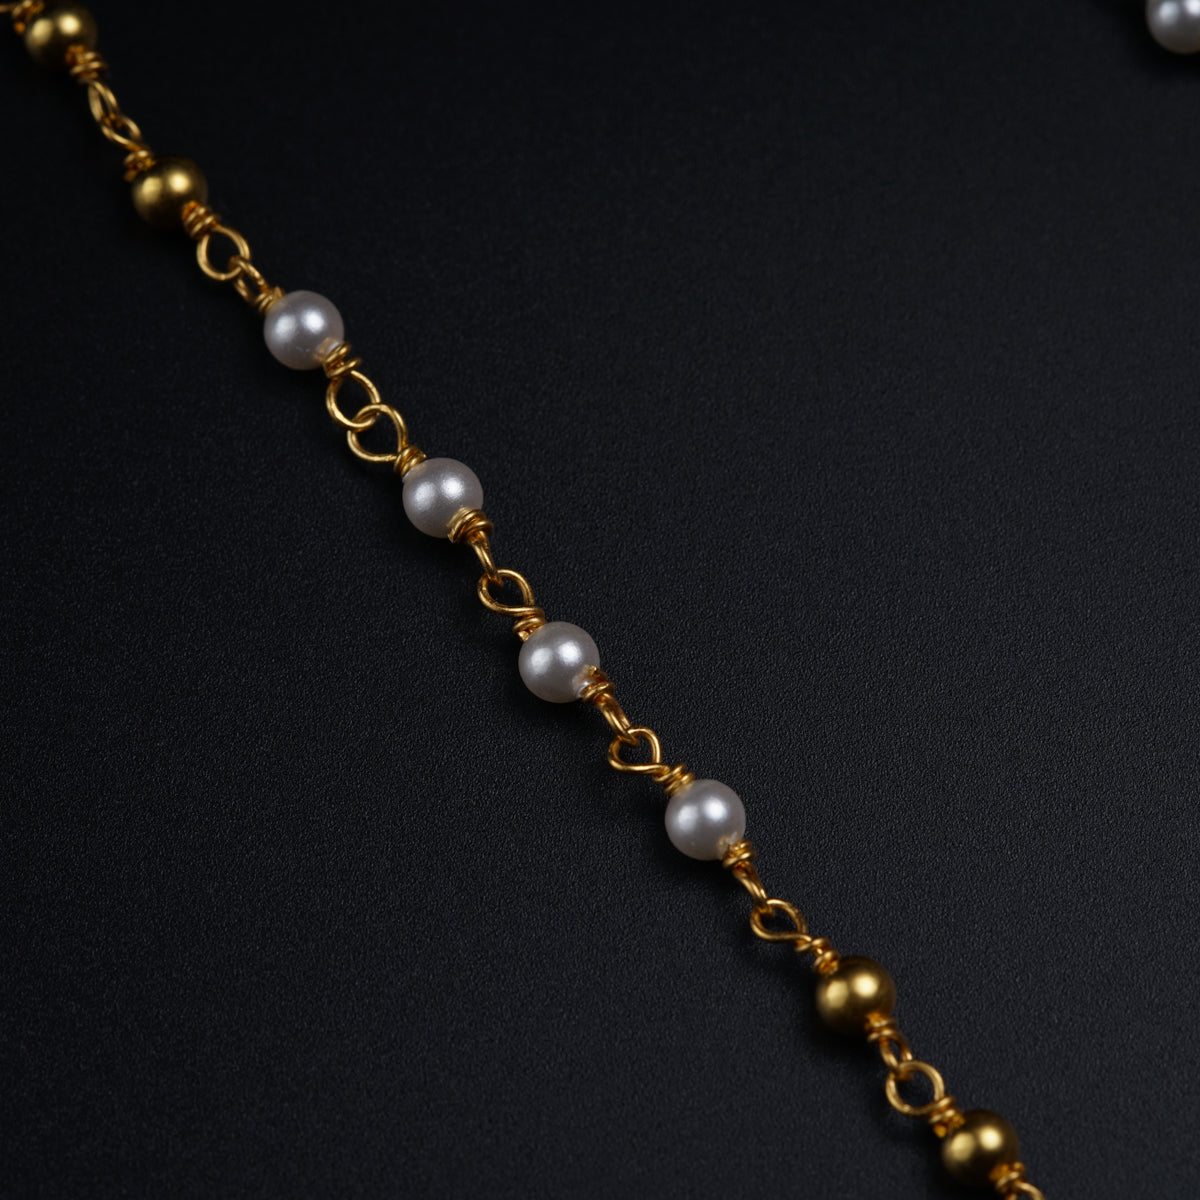 a close up of a chain with pearls on it